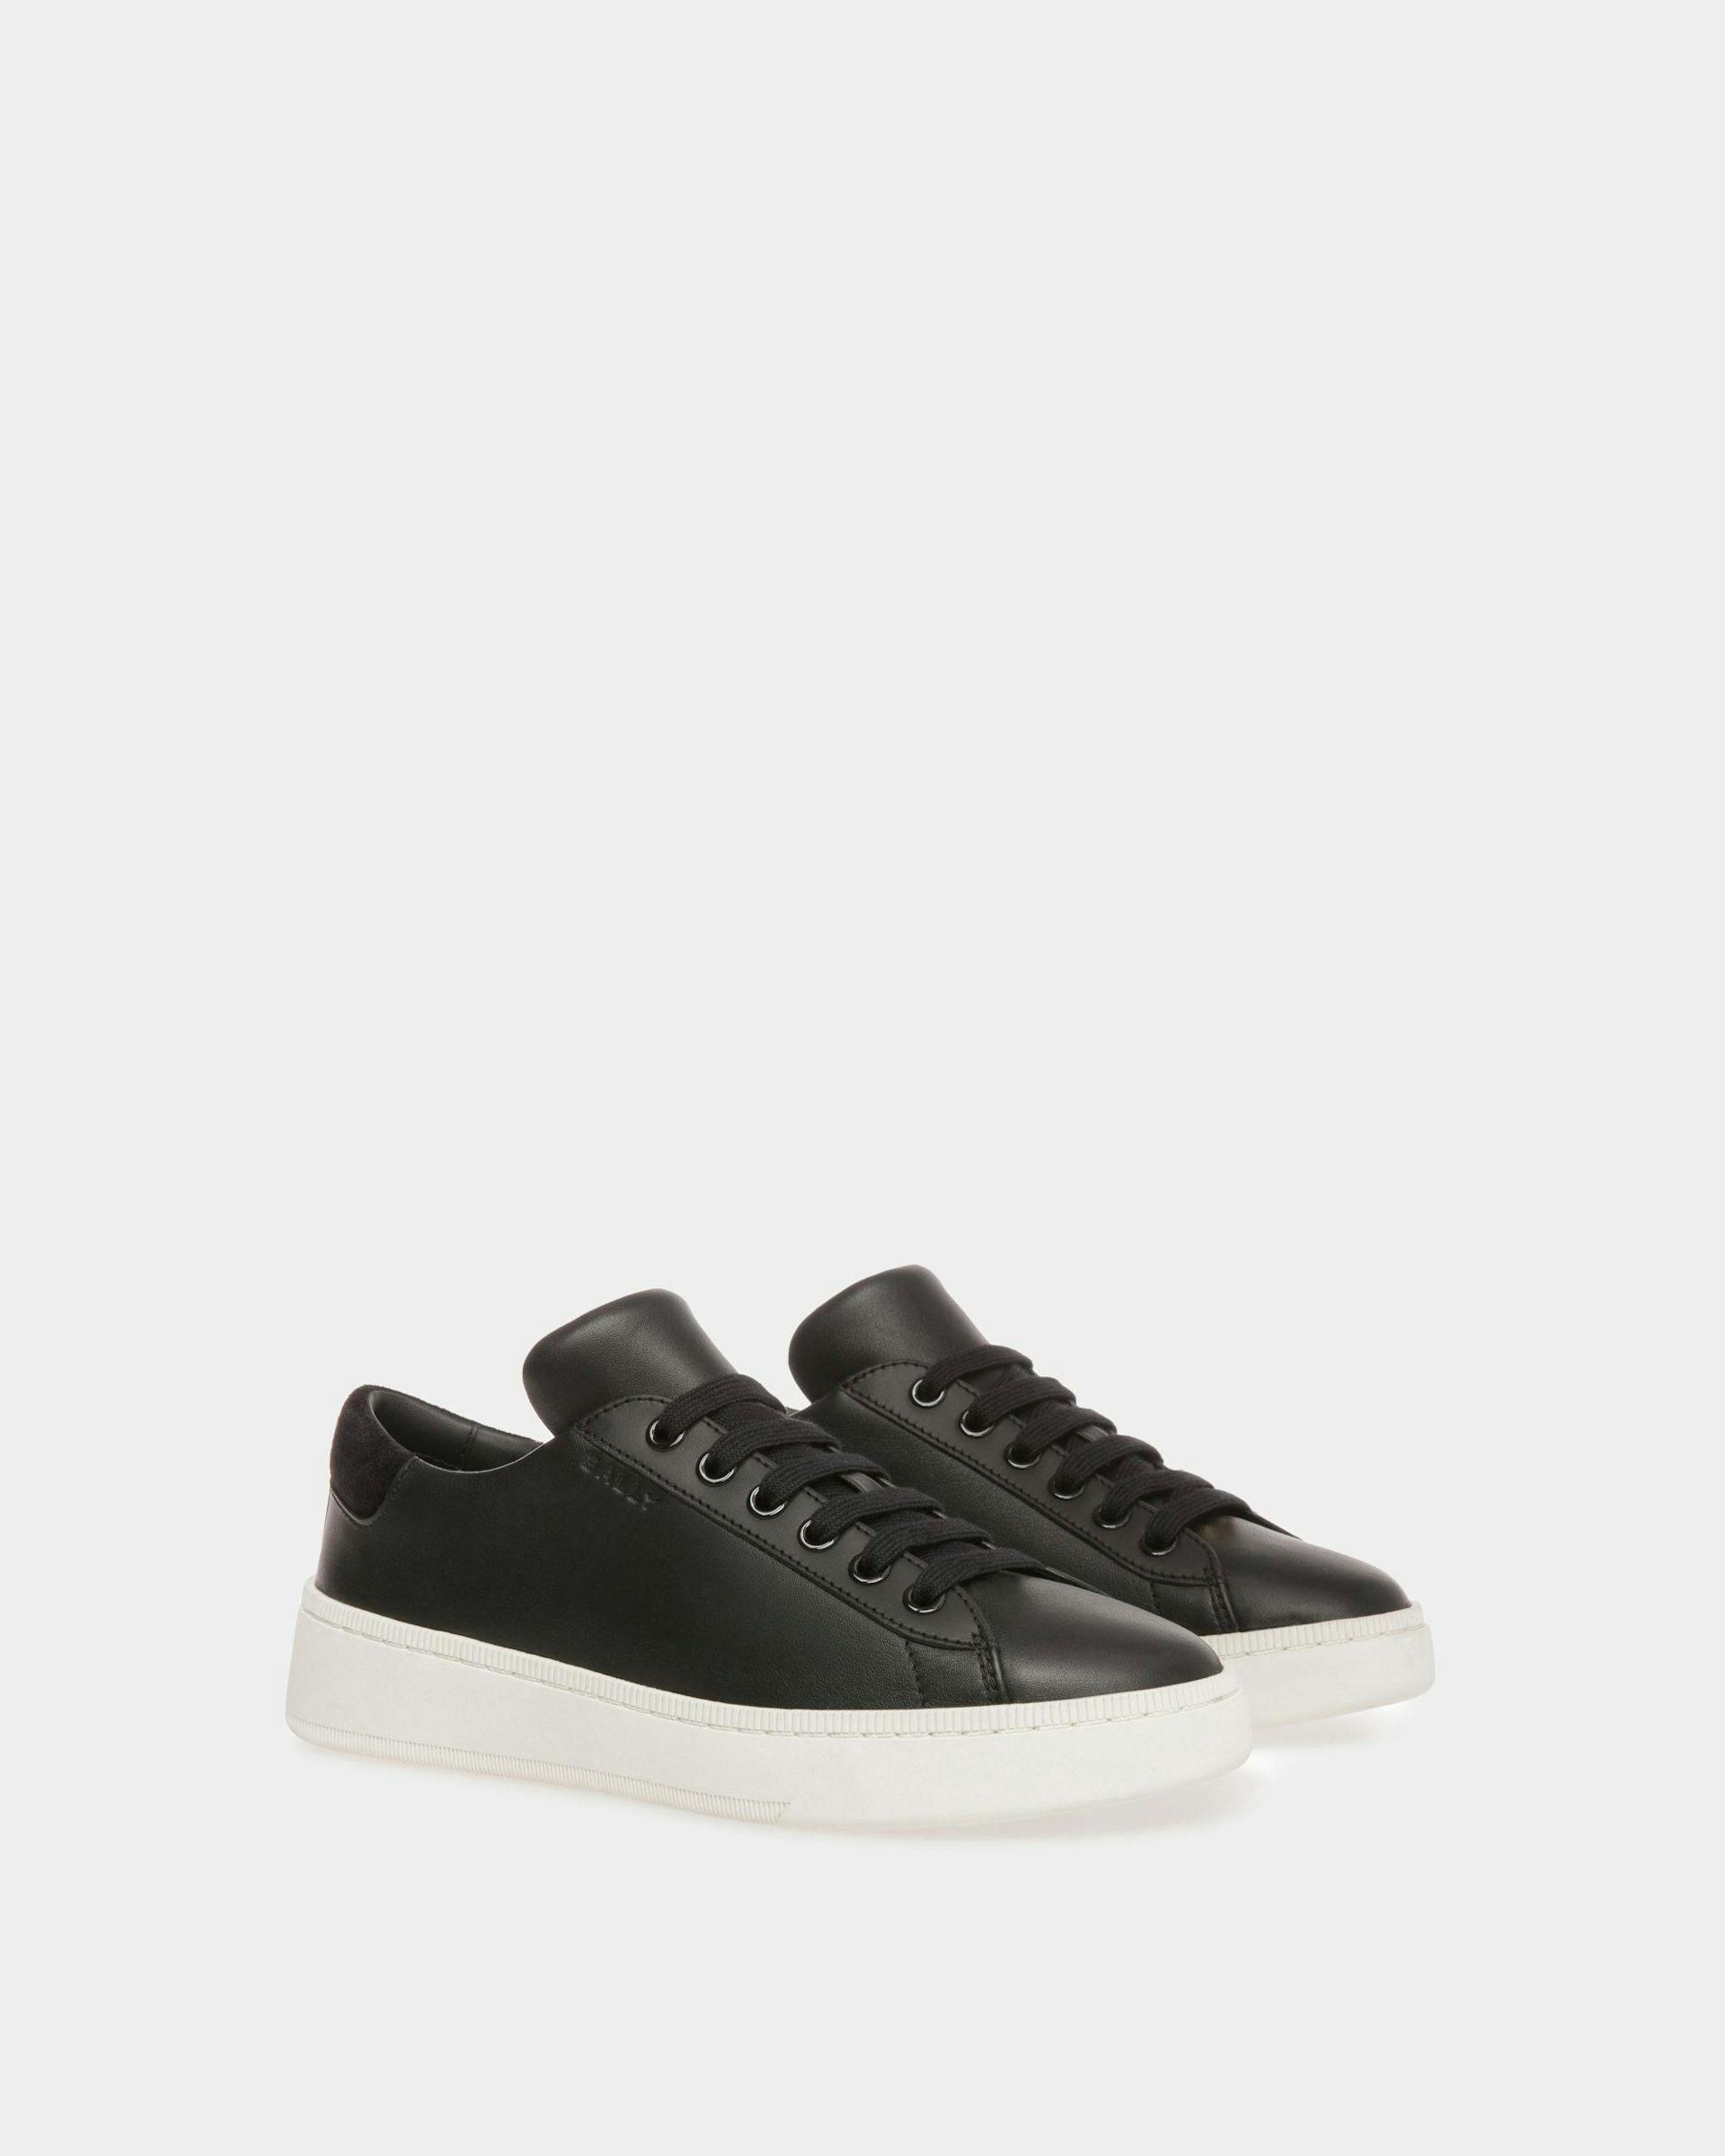 Raise Sneakers In Black And White Leather - Women's - Bally - 04